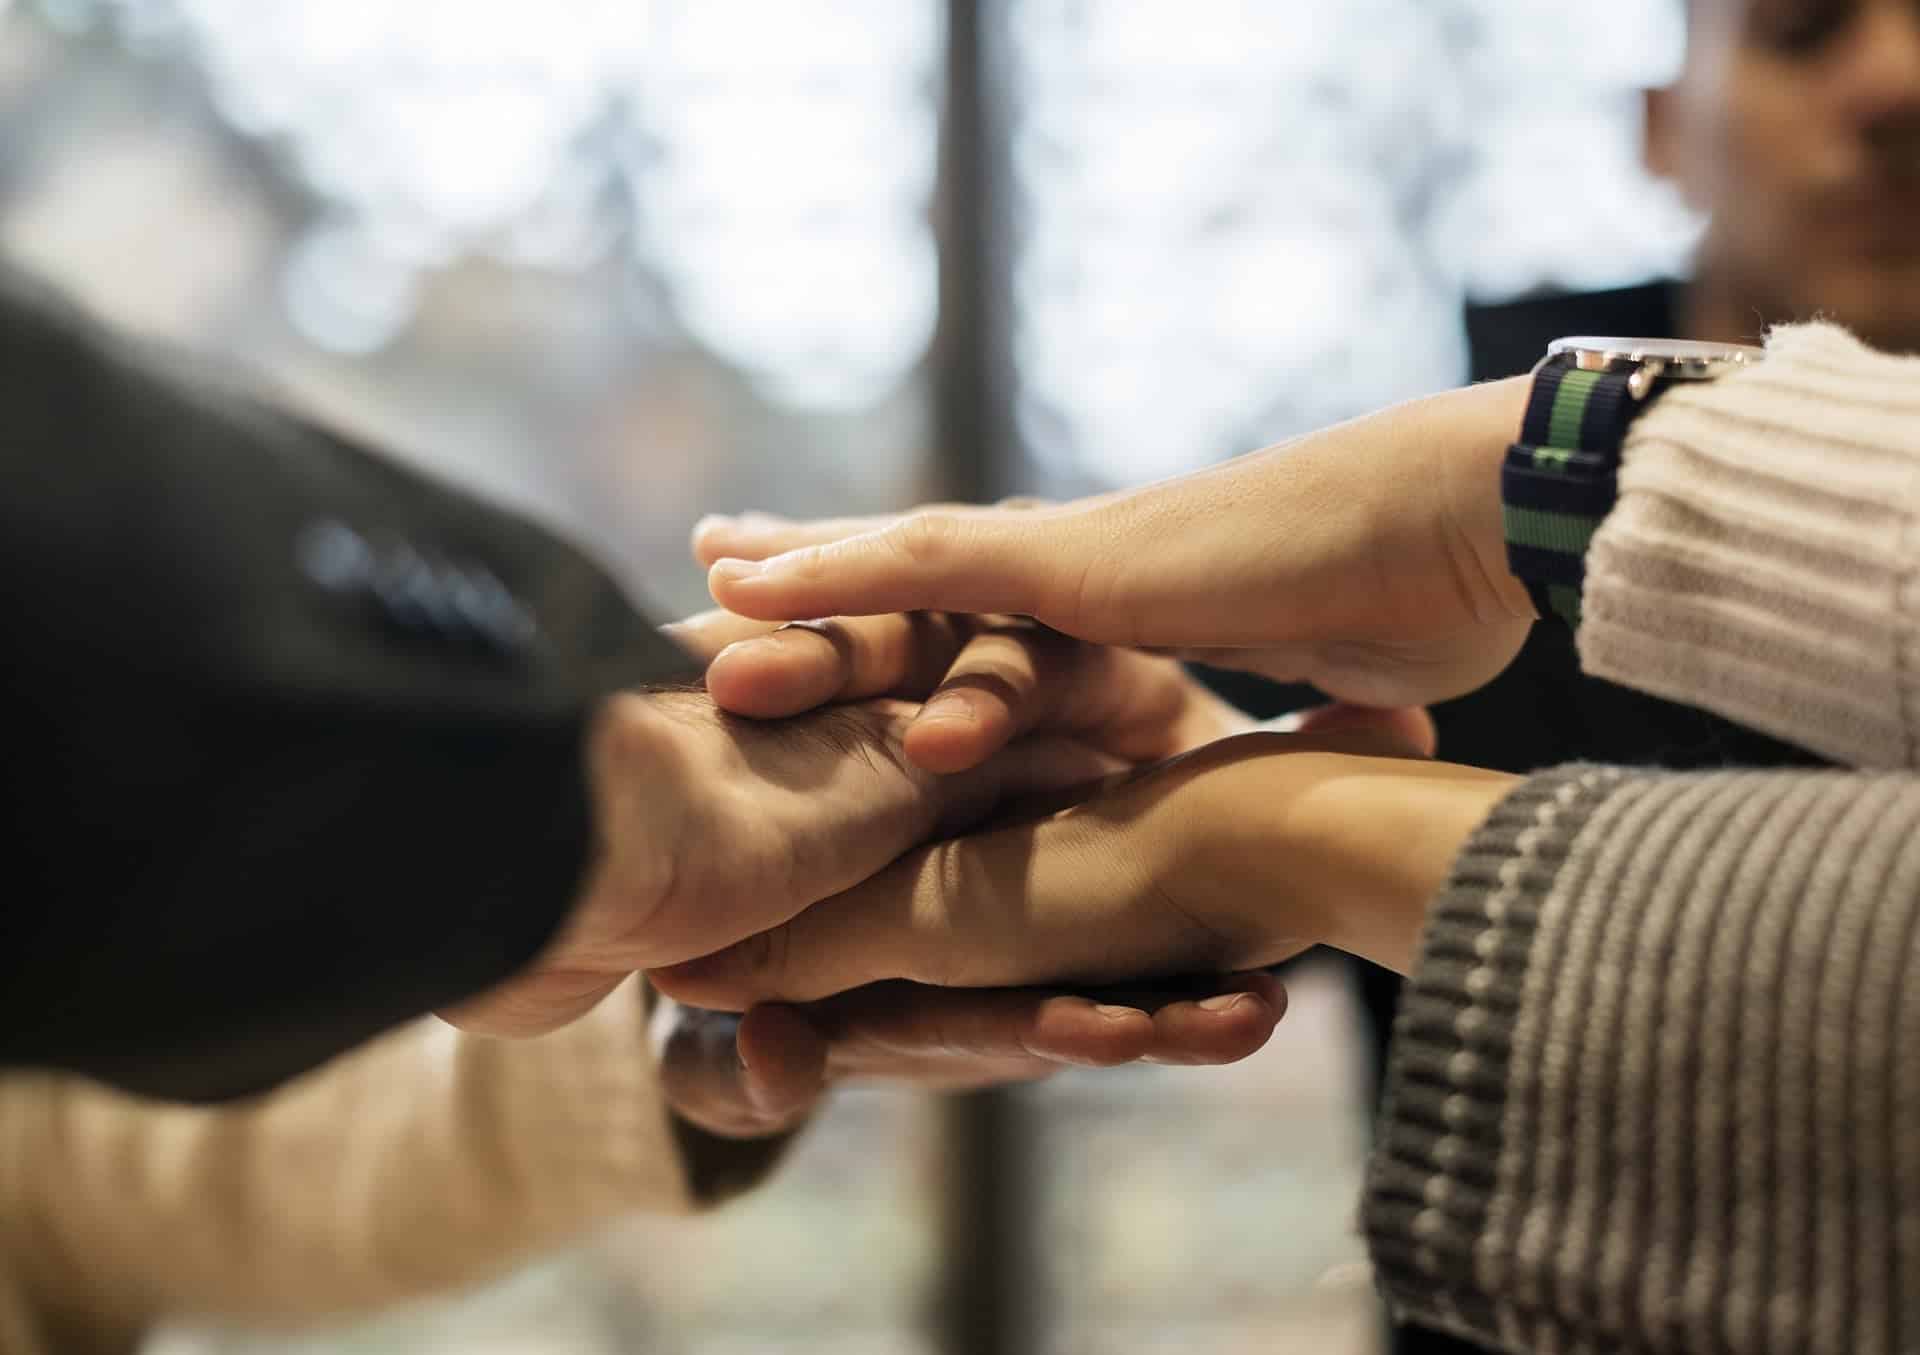 5 ways to build trust in business relationships